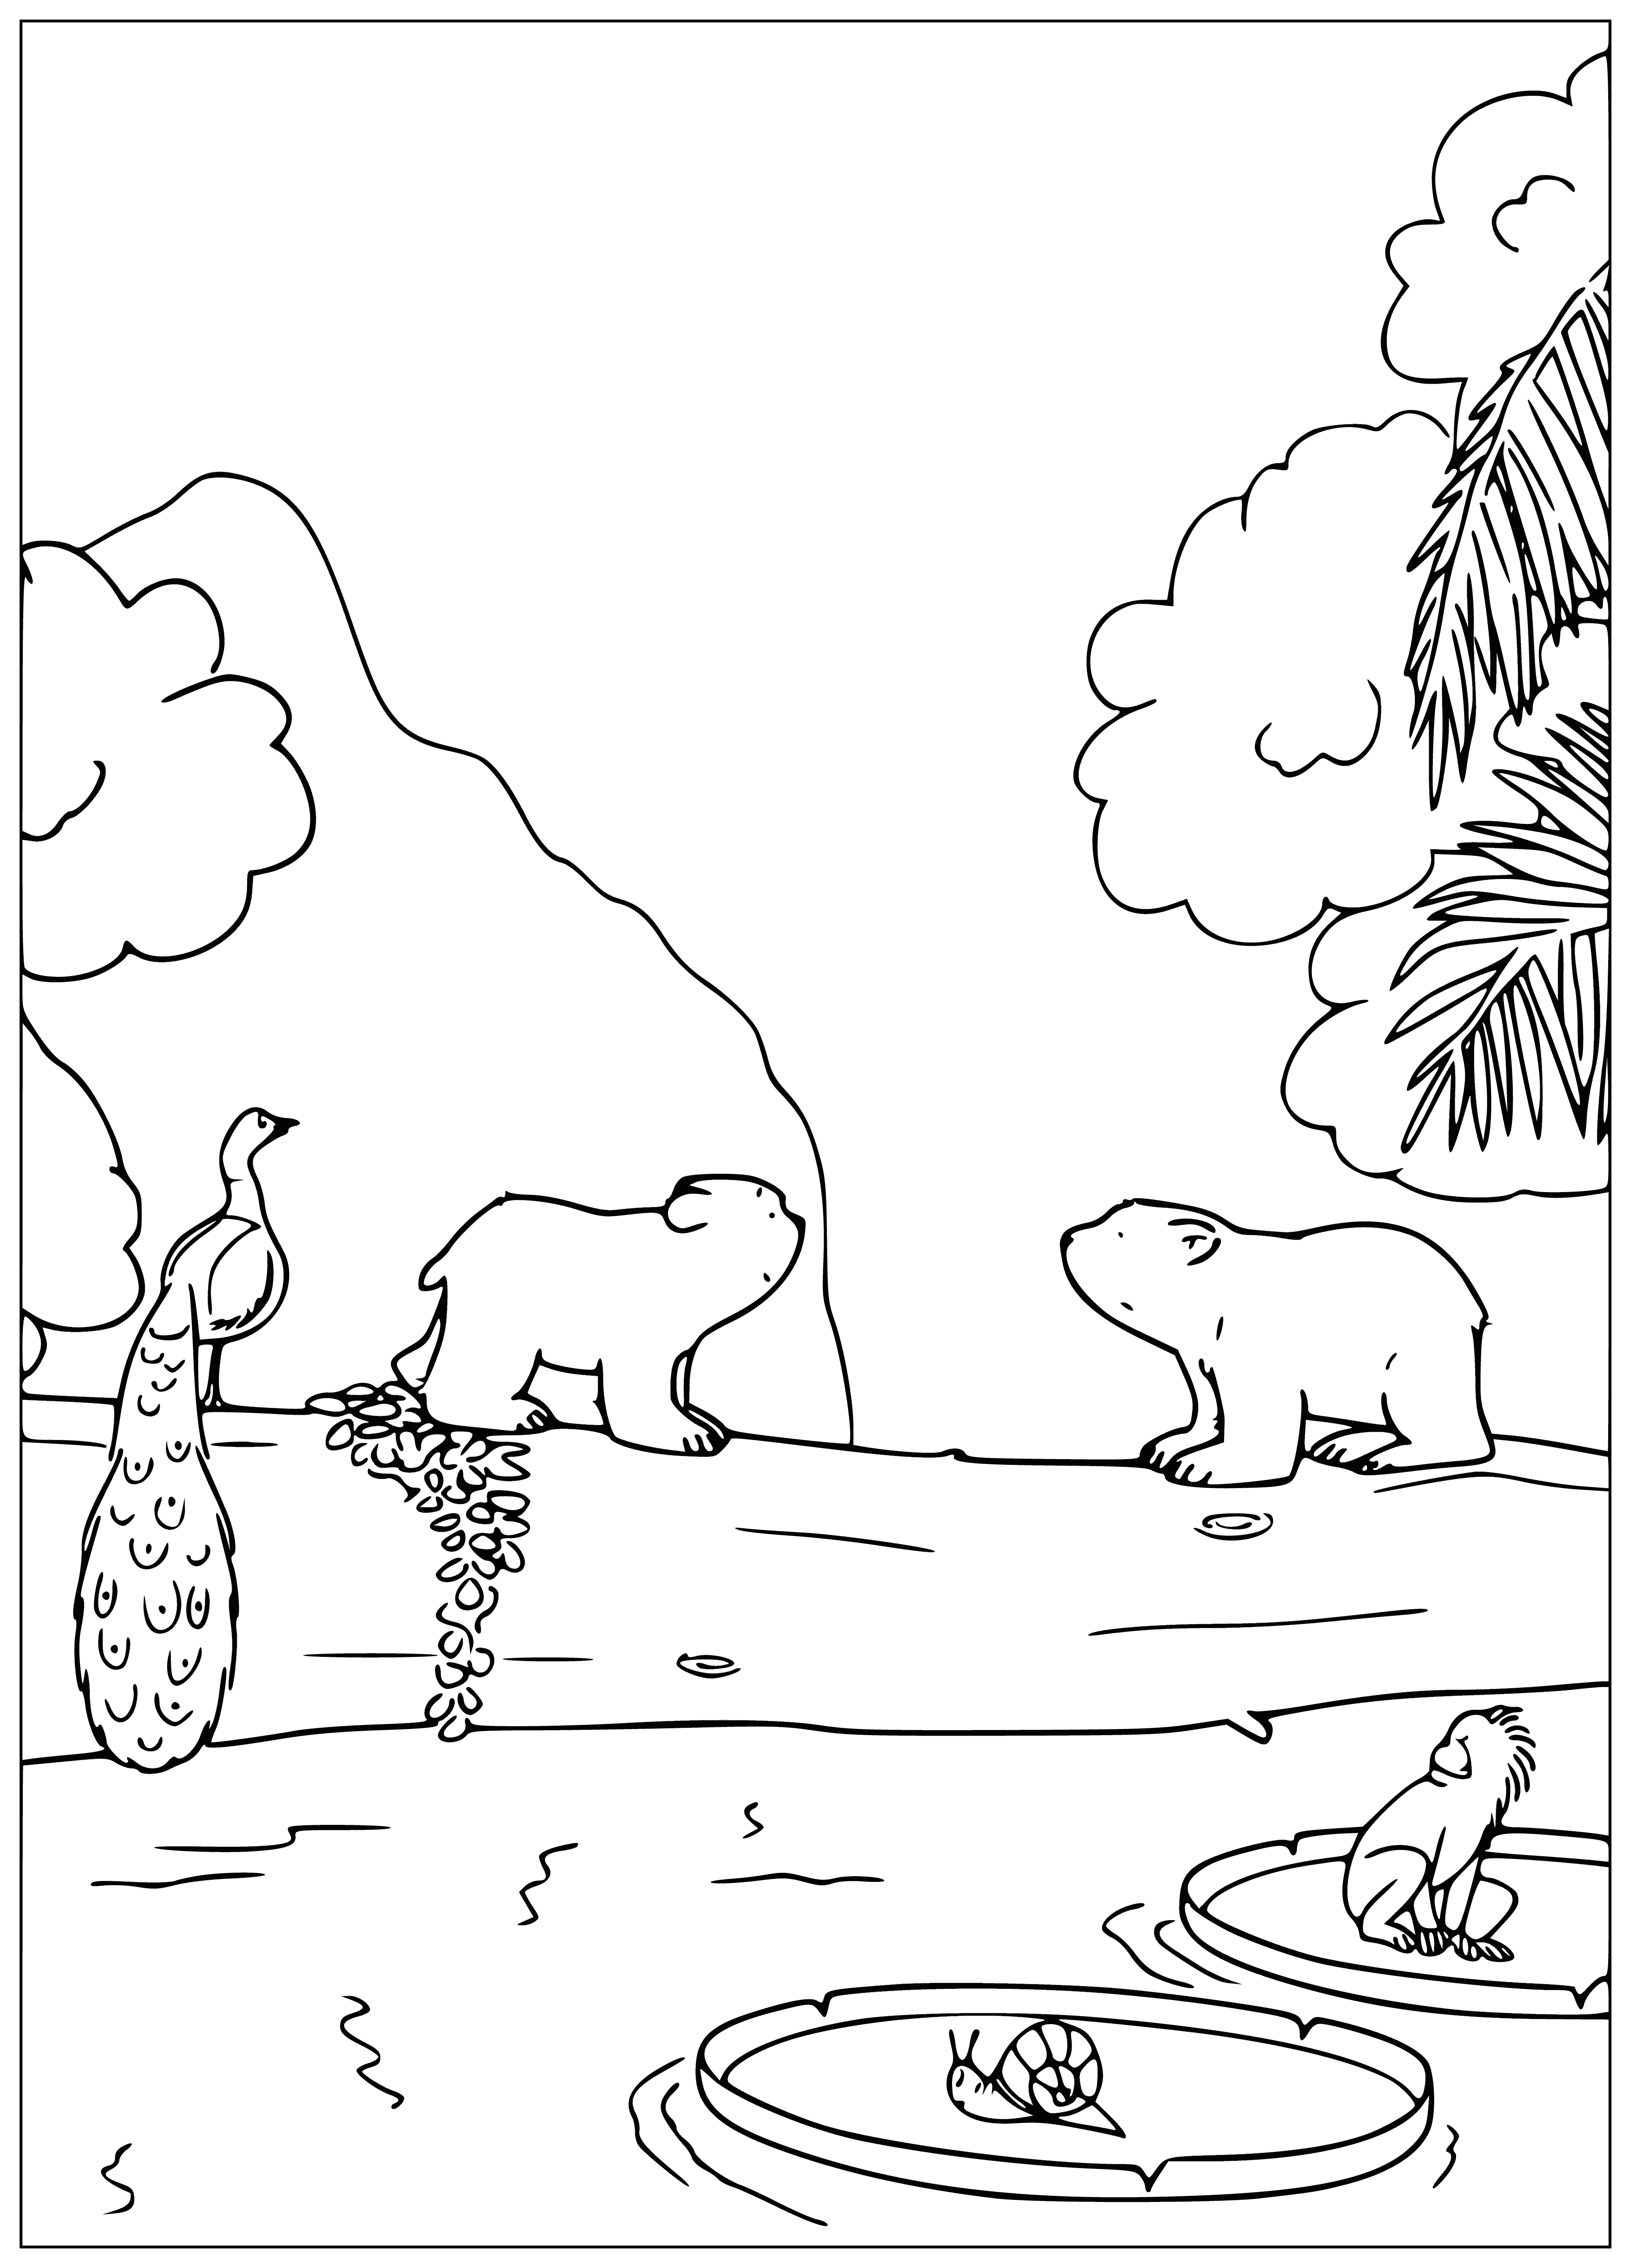 Meeting on a log coloring page